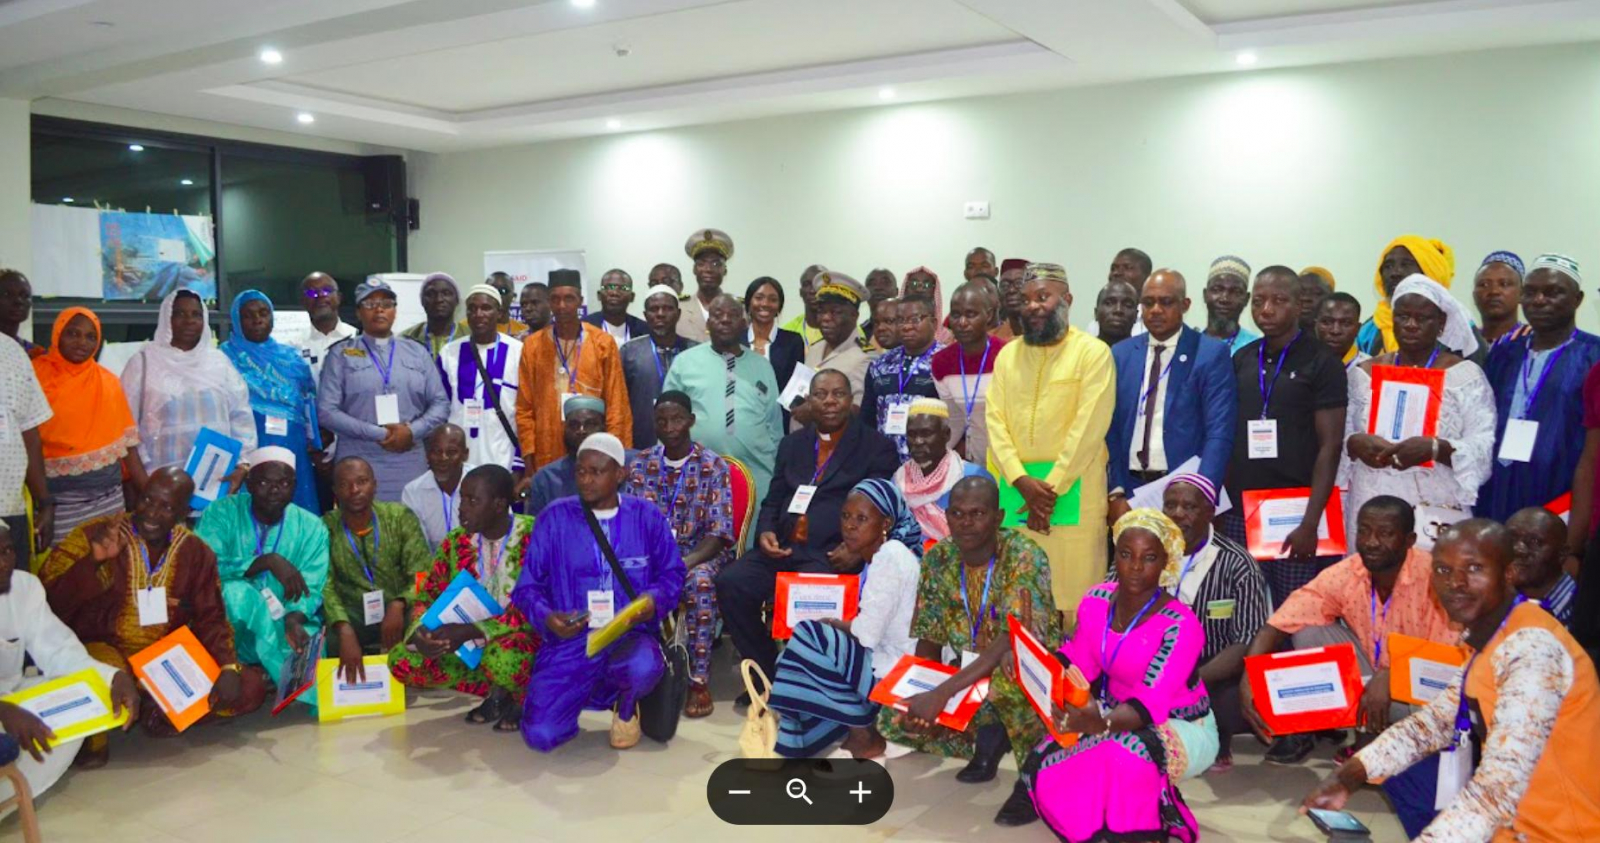 Religious leaders meet to prevent violent extremism in Côte d’Ivoire